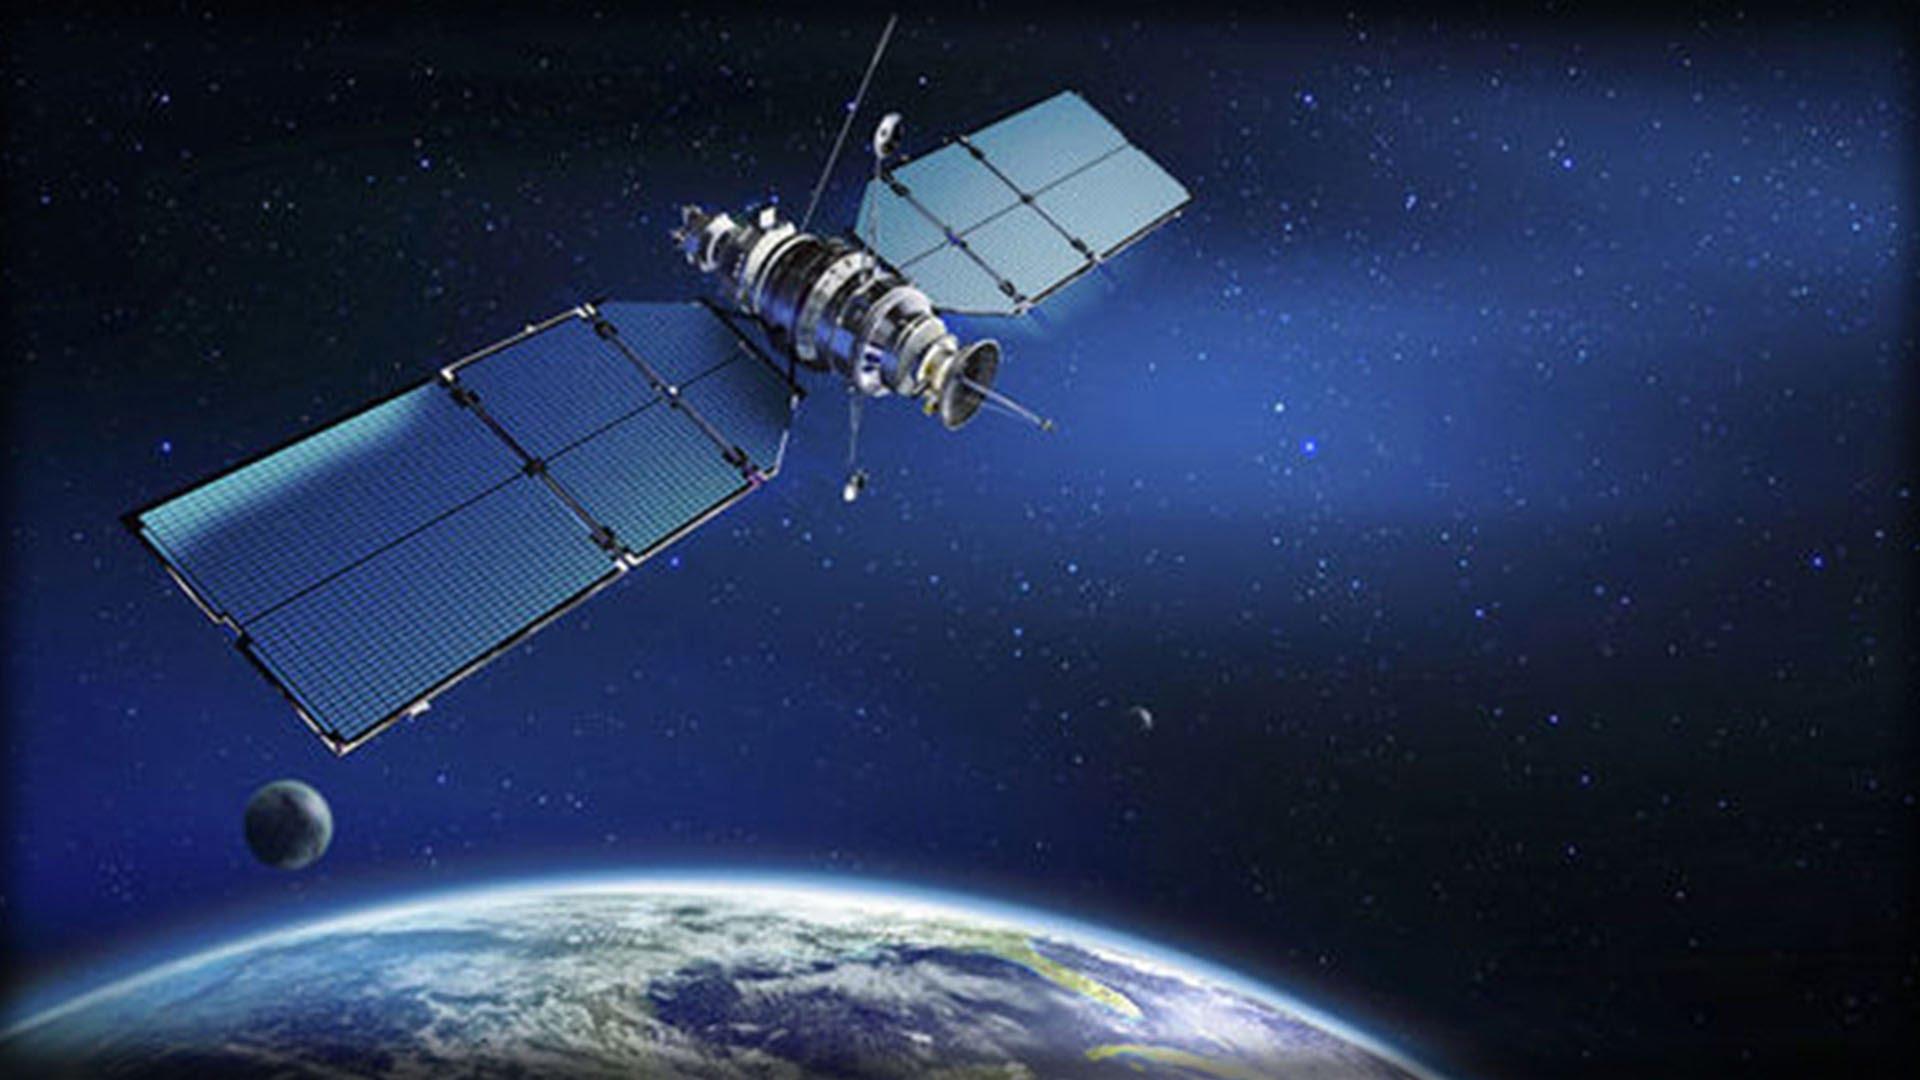 ROGUE CHINESE SATELLITE ON COURSE FOR EARTH